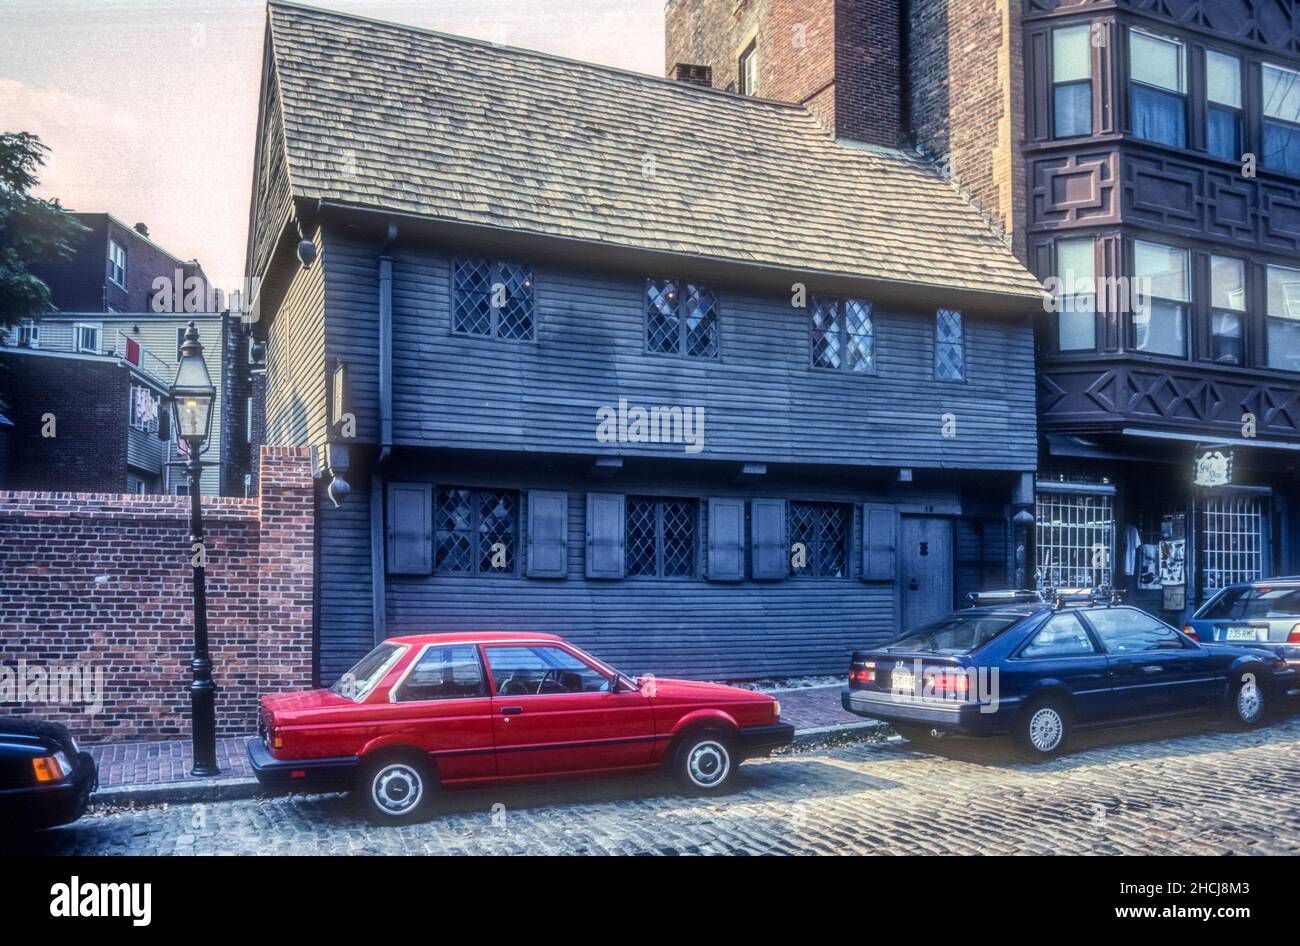 1990 archive photograph of Paul Revere's House in North Square, Boston, Massachusetts.  The house was built c. 1680 and is now a museum. Stock Photo